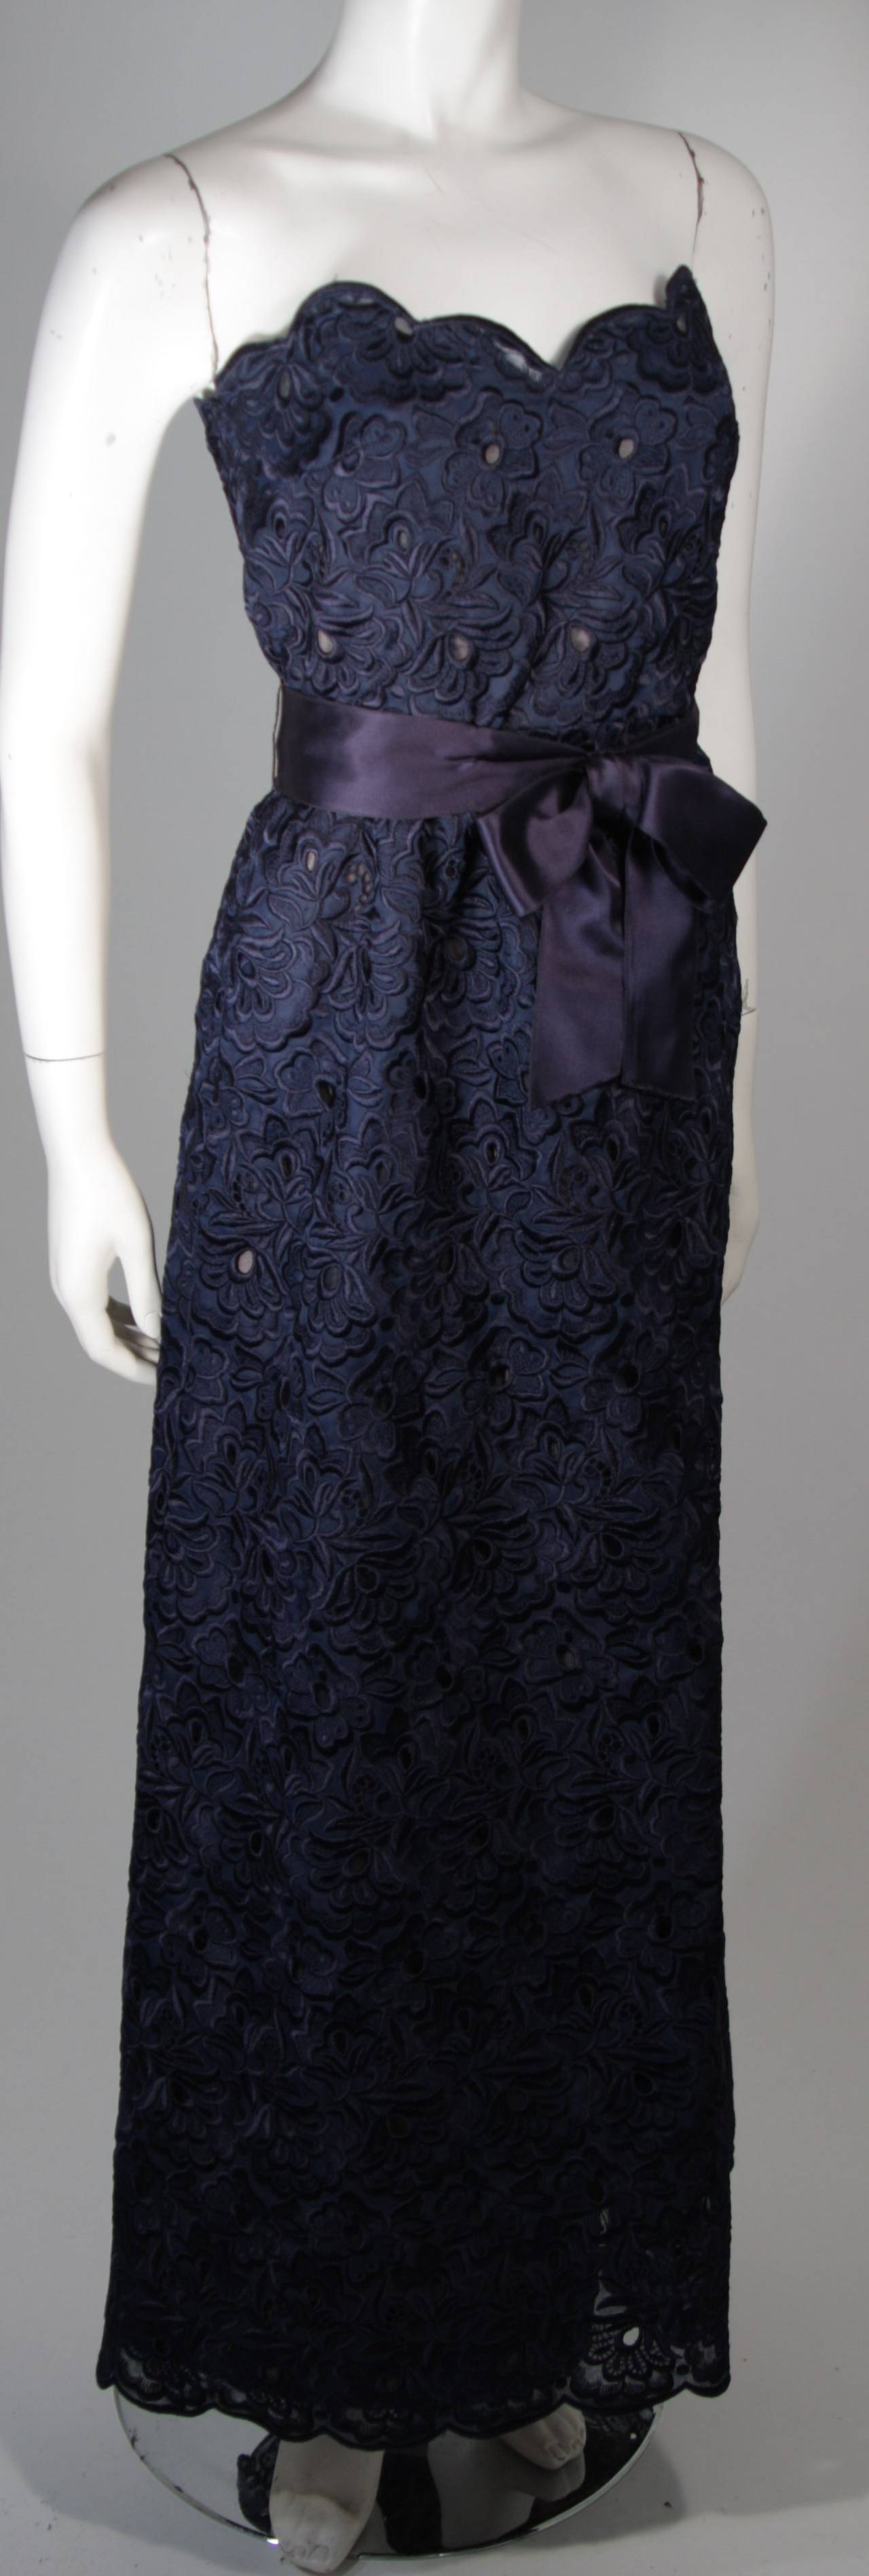 Women's SCAASI Navy Floral Lace Evening Gown with Satin Waist Belt Size 2 For Sale